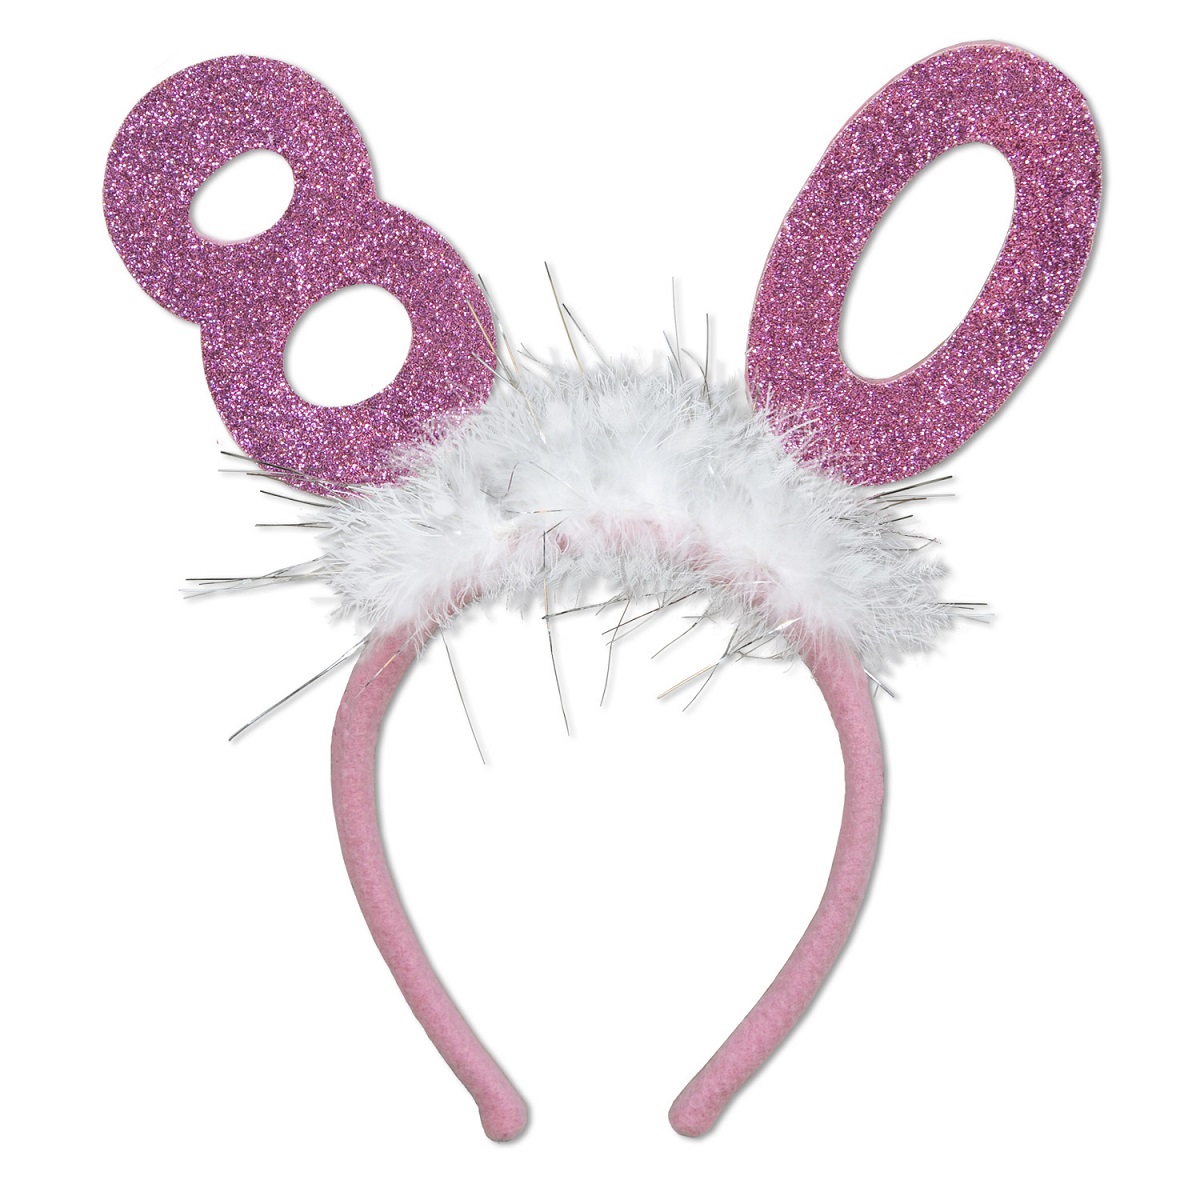 Beistle Club Pack of 12 Pink Glittered "80" Bopper Headband Party Favor Costume Accessories